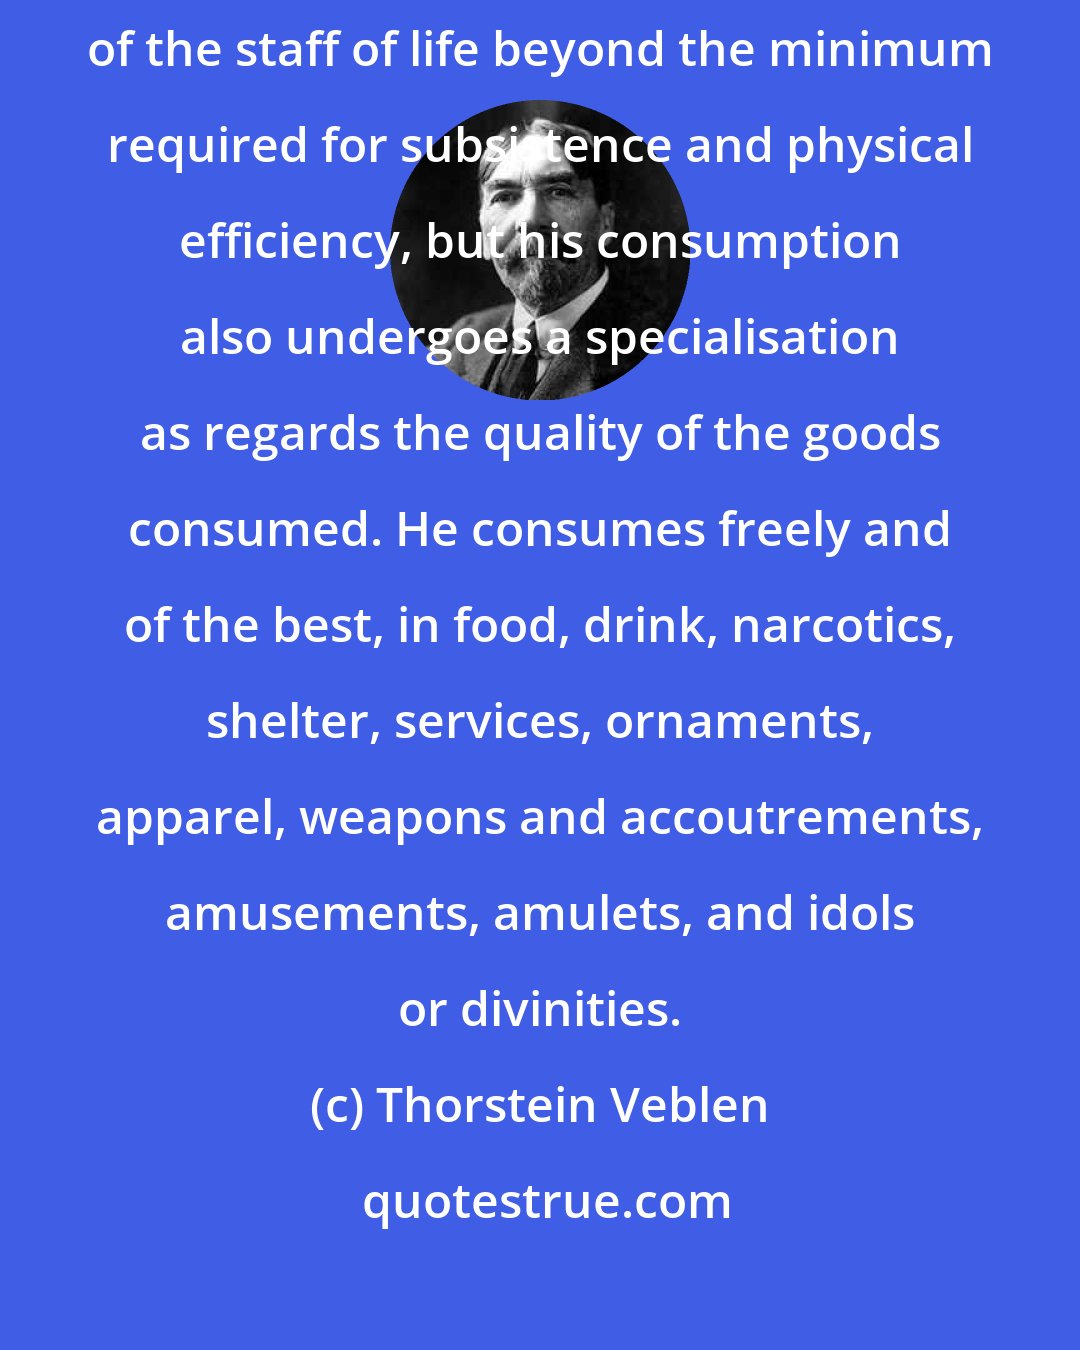 Thorstein Veblen: The quasi-peaceable gentleman of leisure, then, not only consumes of the staff of life beyond the minimum required for subsistence and physical efficiency, but his consumption also undergoes a specialisation as regards the quality of the goods consumed. He consumes freely and of the best, in food, drink, narcotics, shelter, services, ornaments, apparel, weapons and accoutrements, amusements, amulets, and idols or divinities.